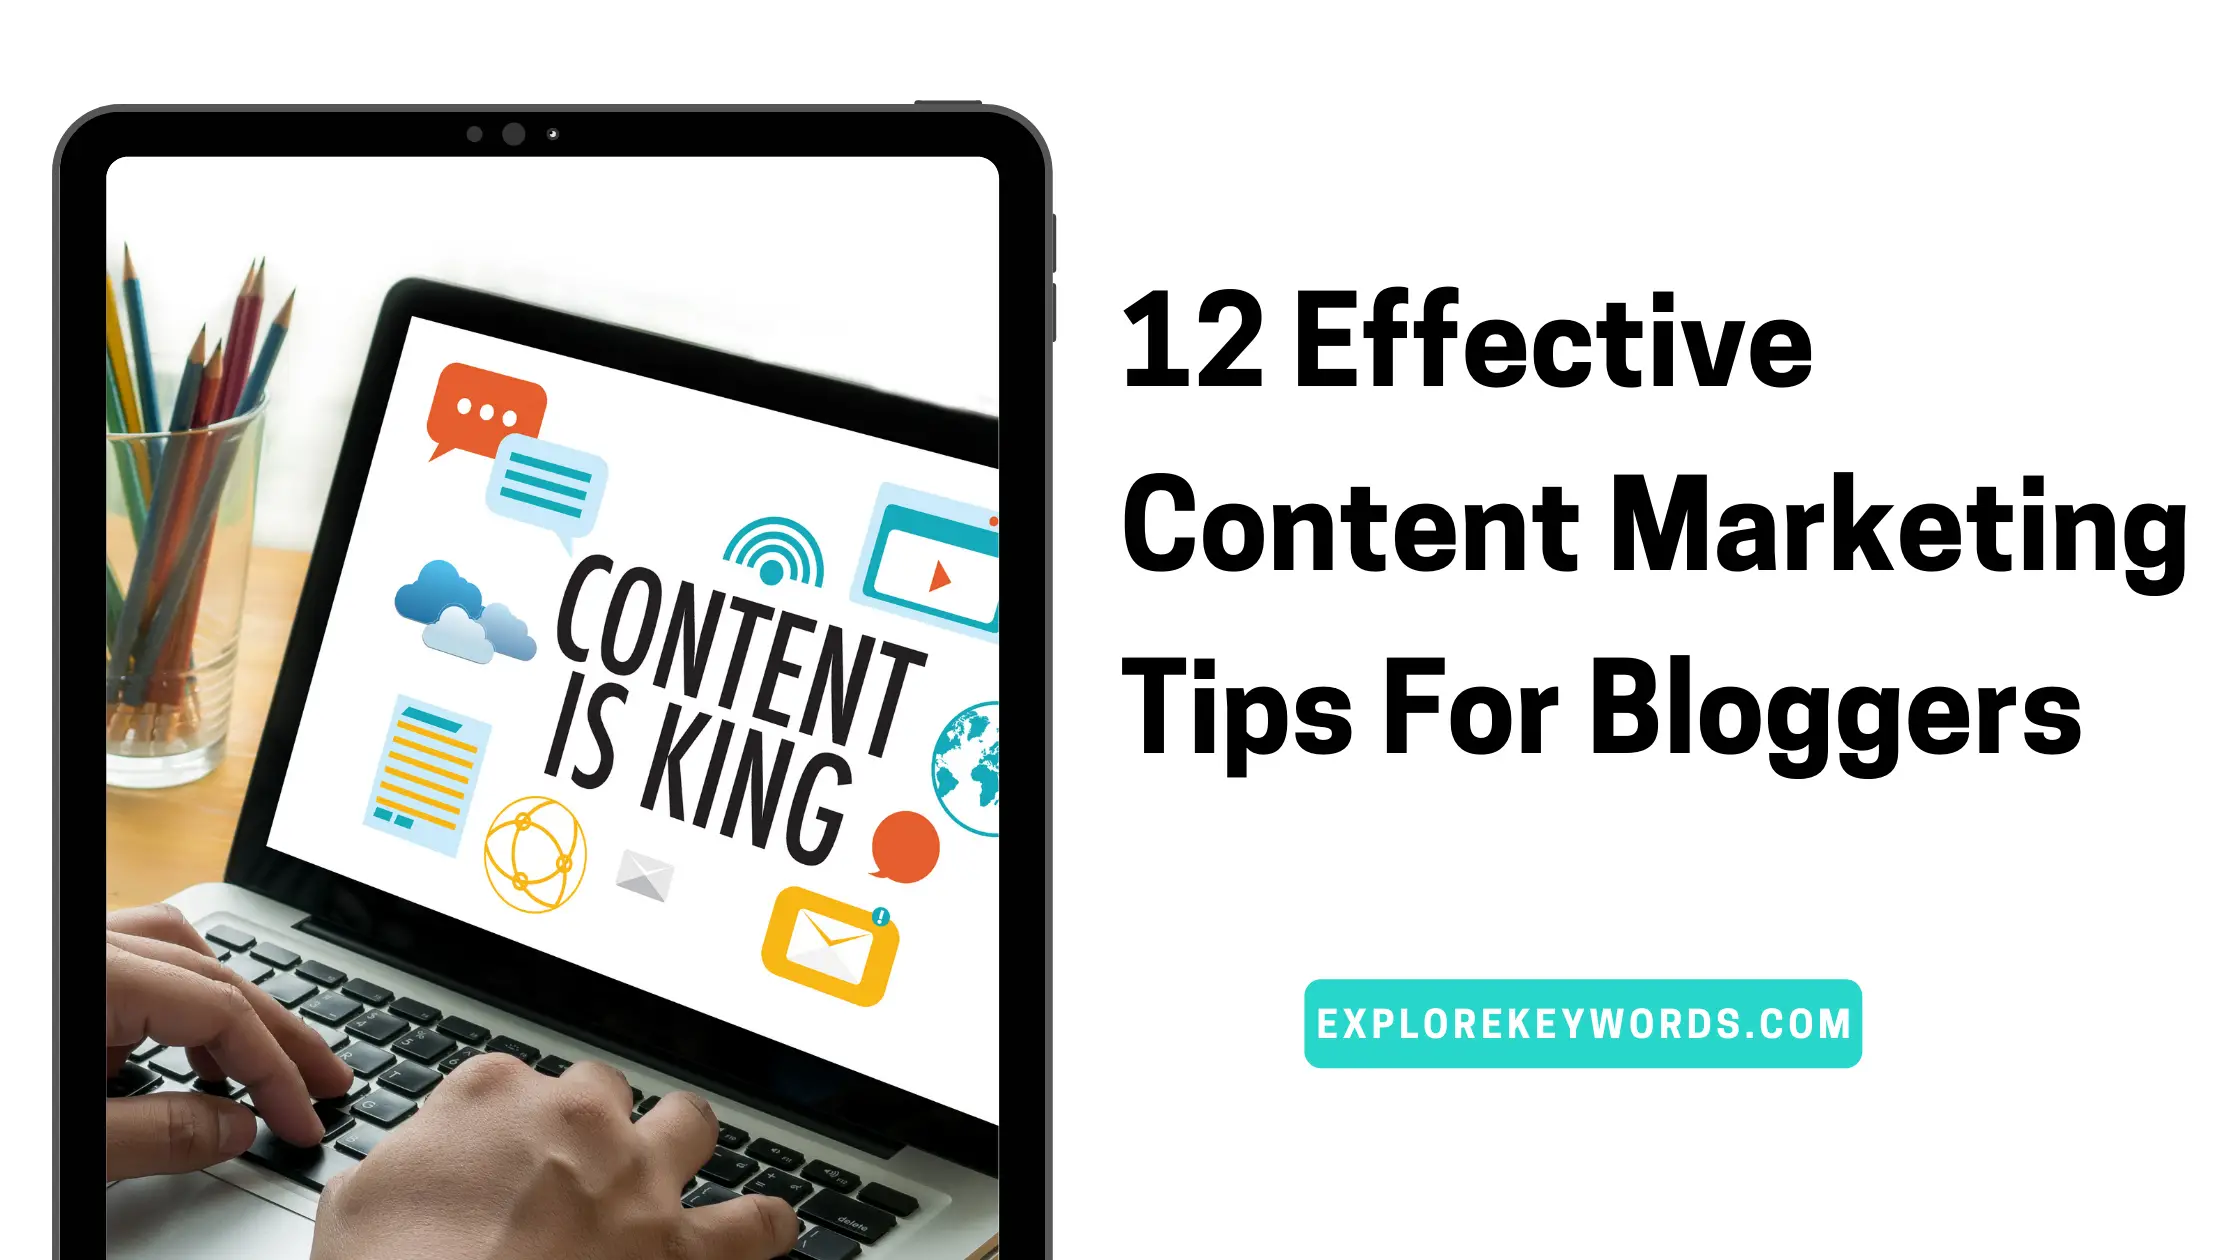 12 Effective Content Marketing Tips For Bloggers